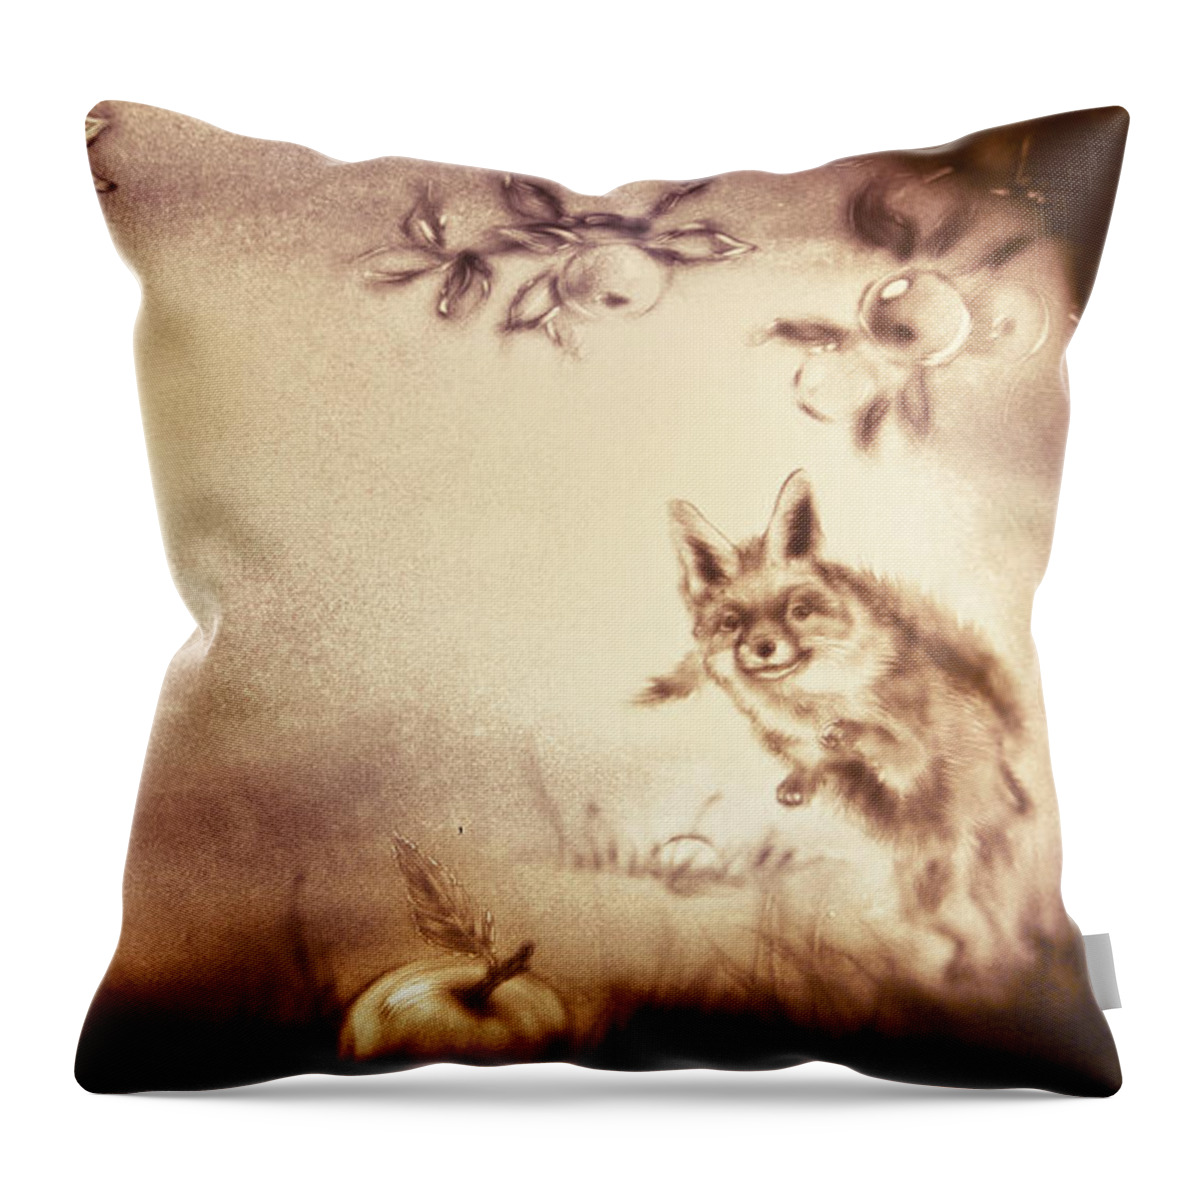 The Little Prince Throw Pillow featuring the painting The Little Prince and the Fox by Elena Vedernikova